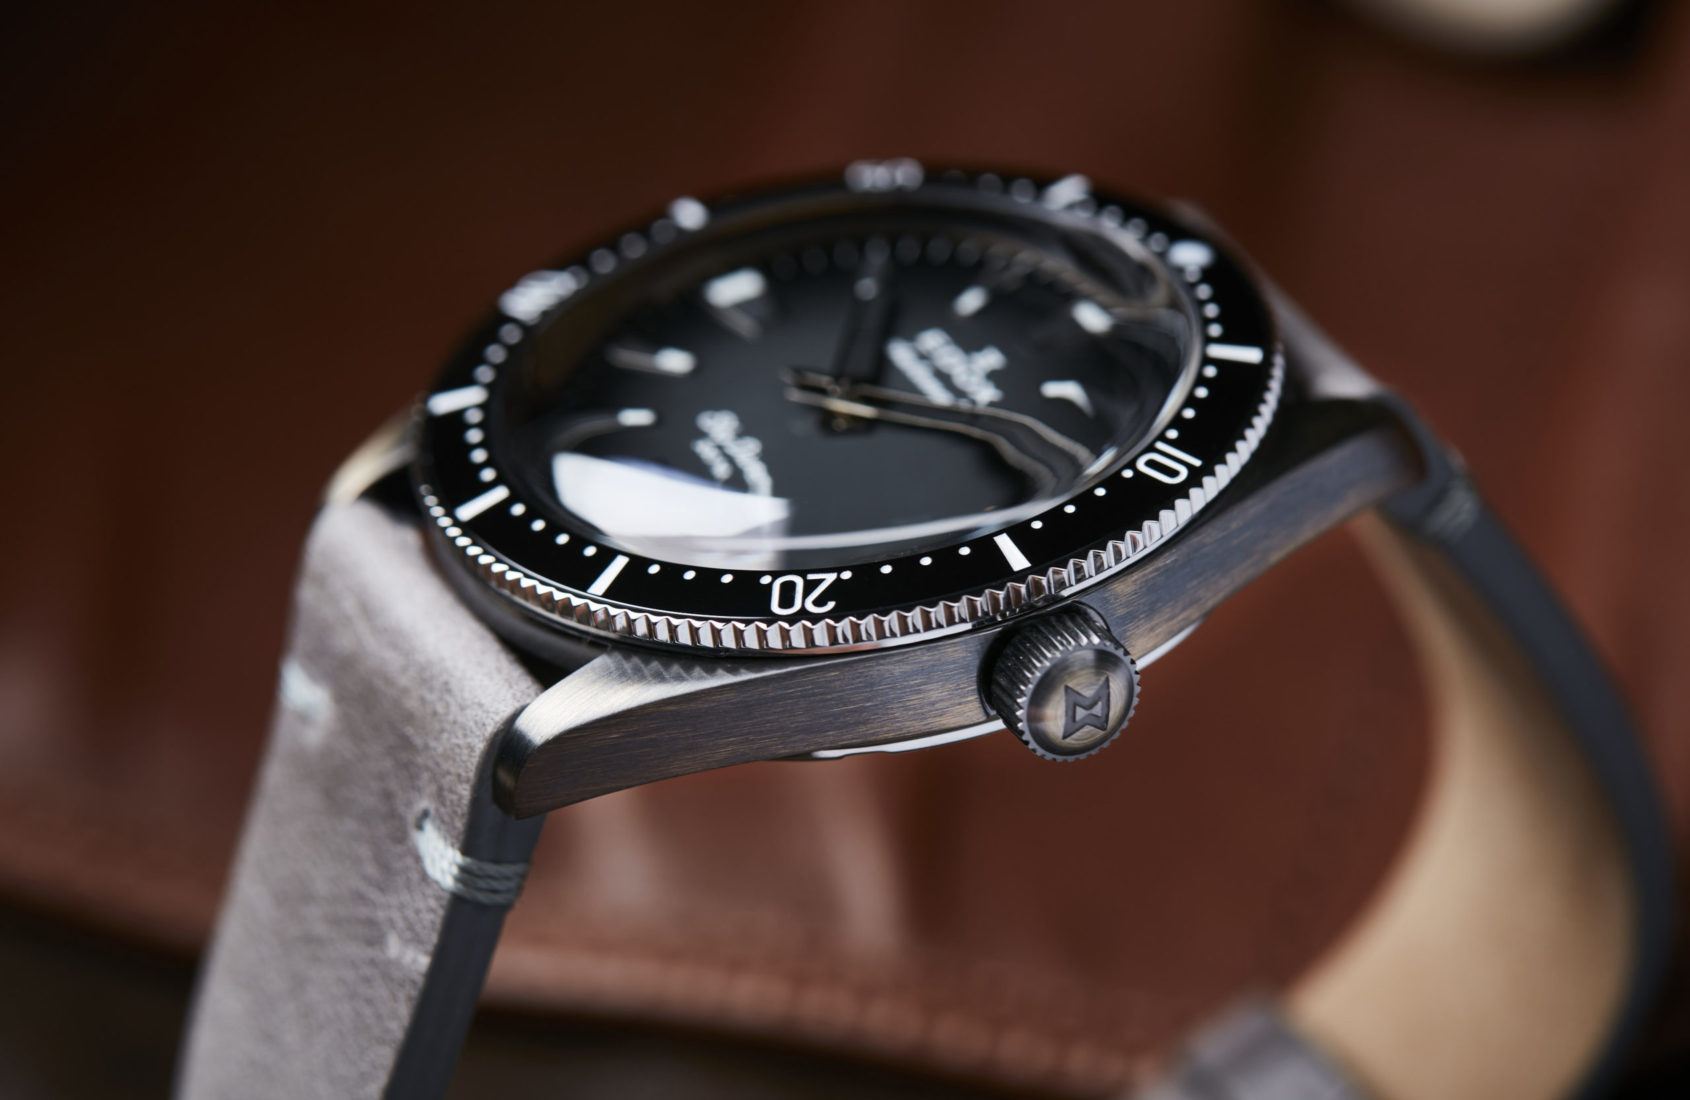 HANDS-ON: The Edox SkyDiver Limited Editions